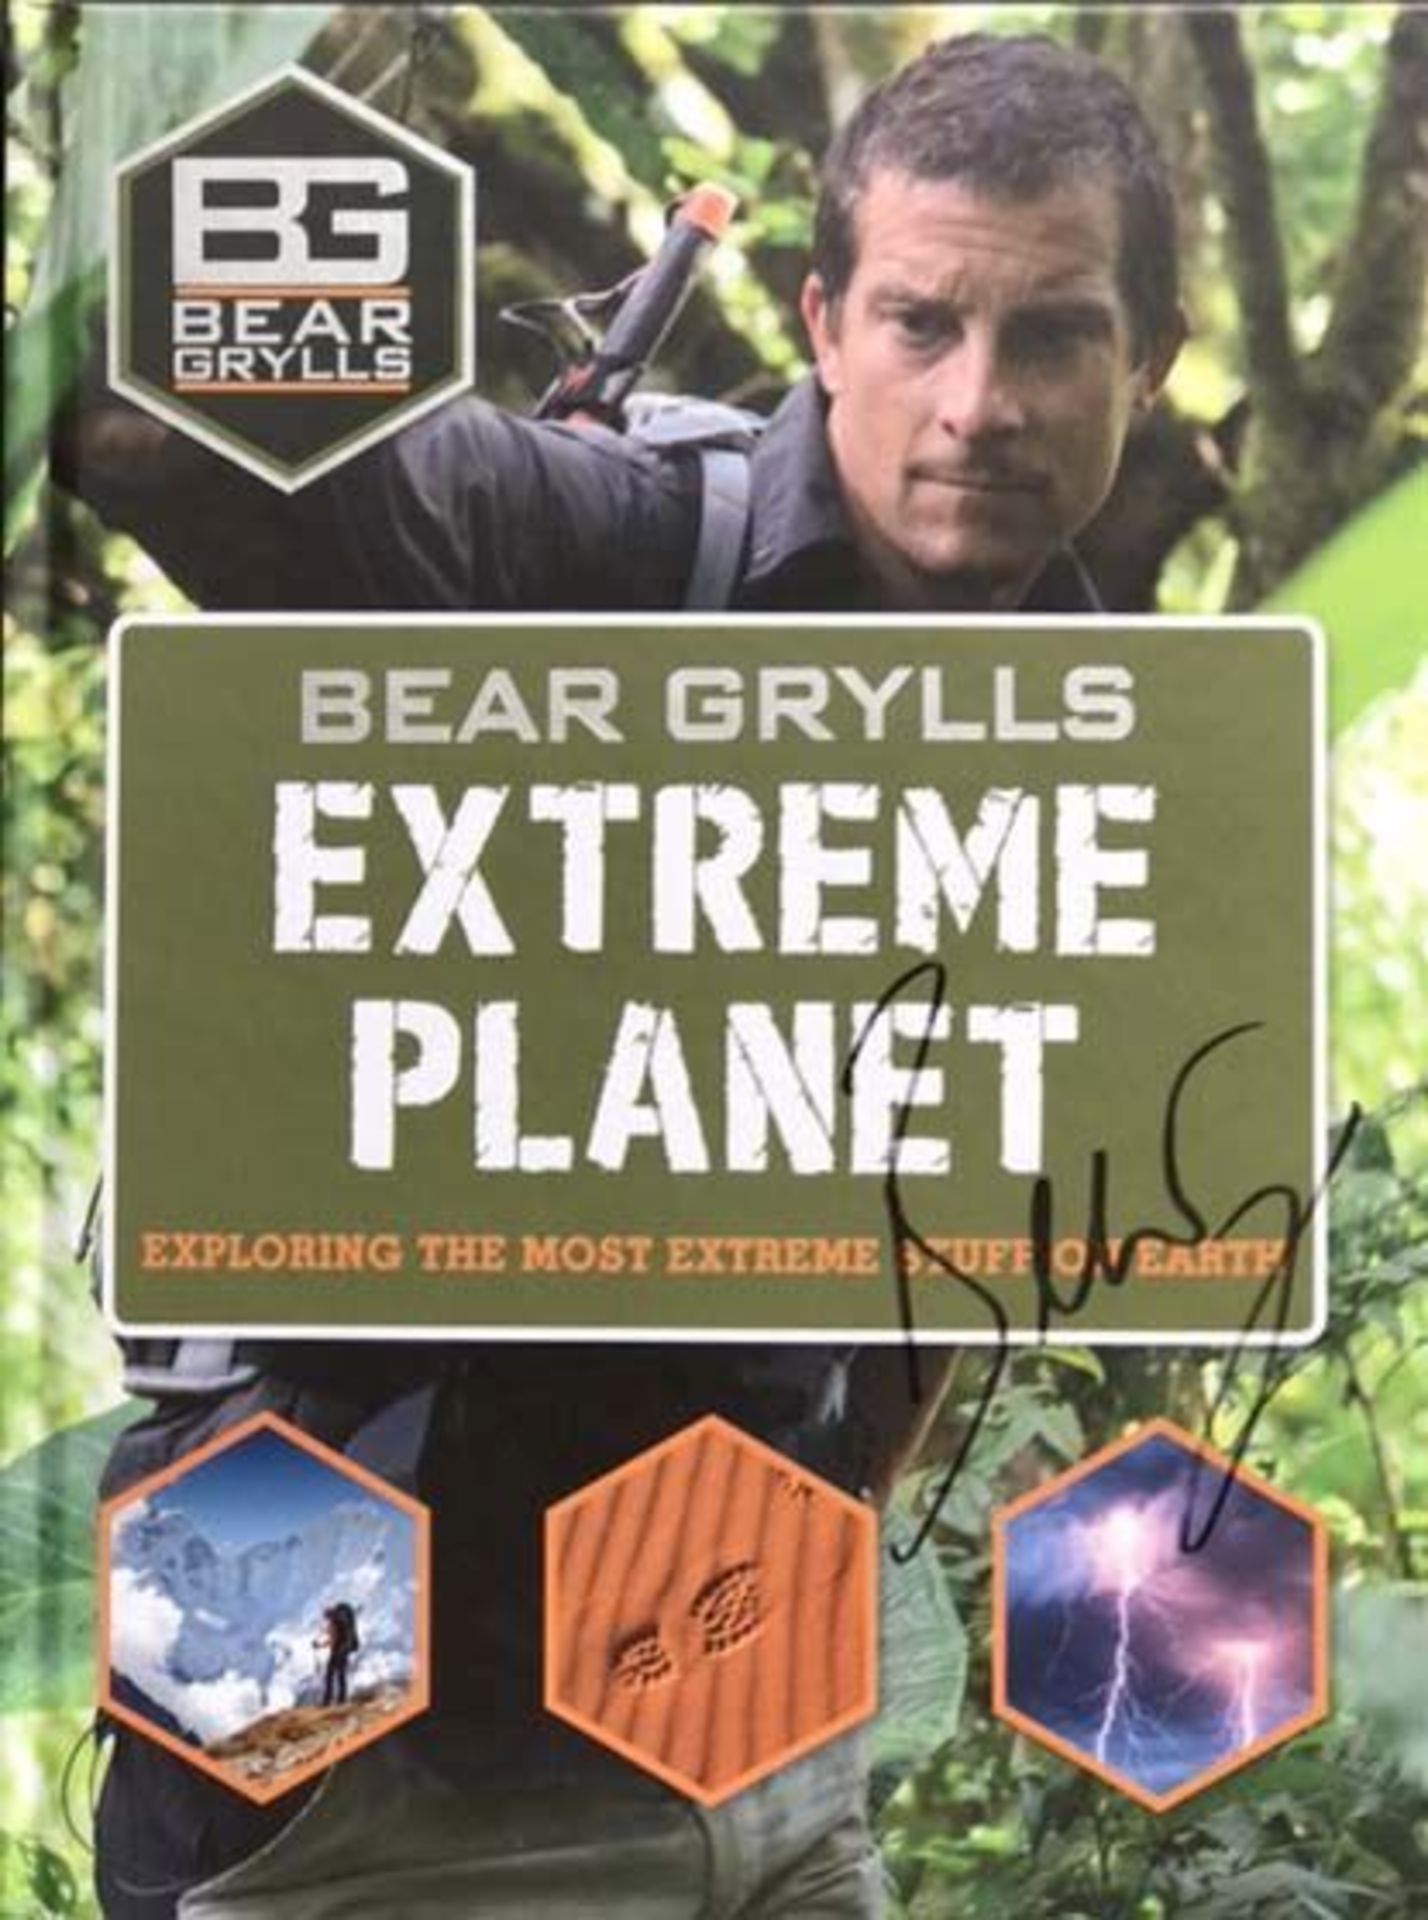 Hardback copy of 'Extreme Planet - Exploring The Most Extreme Stuff On Earth'. Signed by the